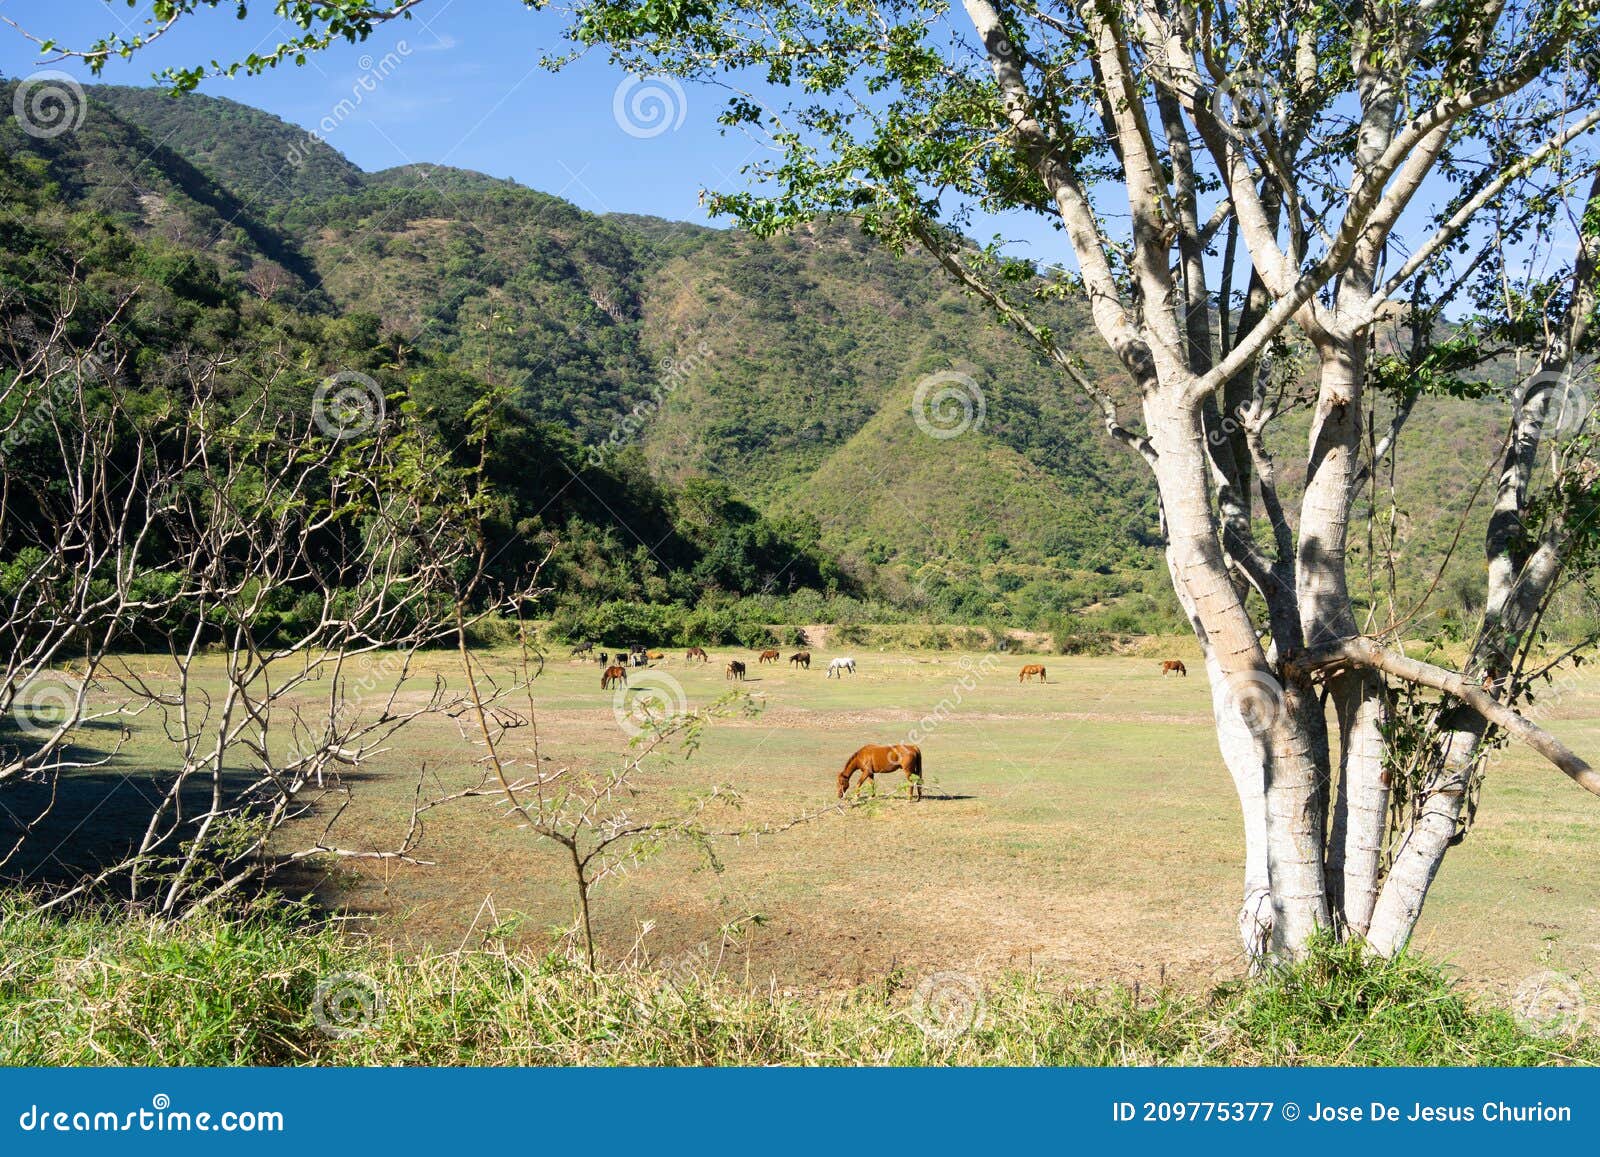 in the green field there are many horses that are grazing.